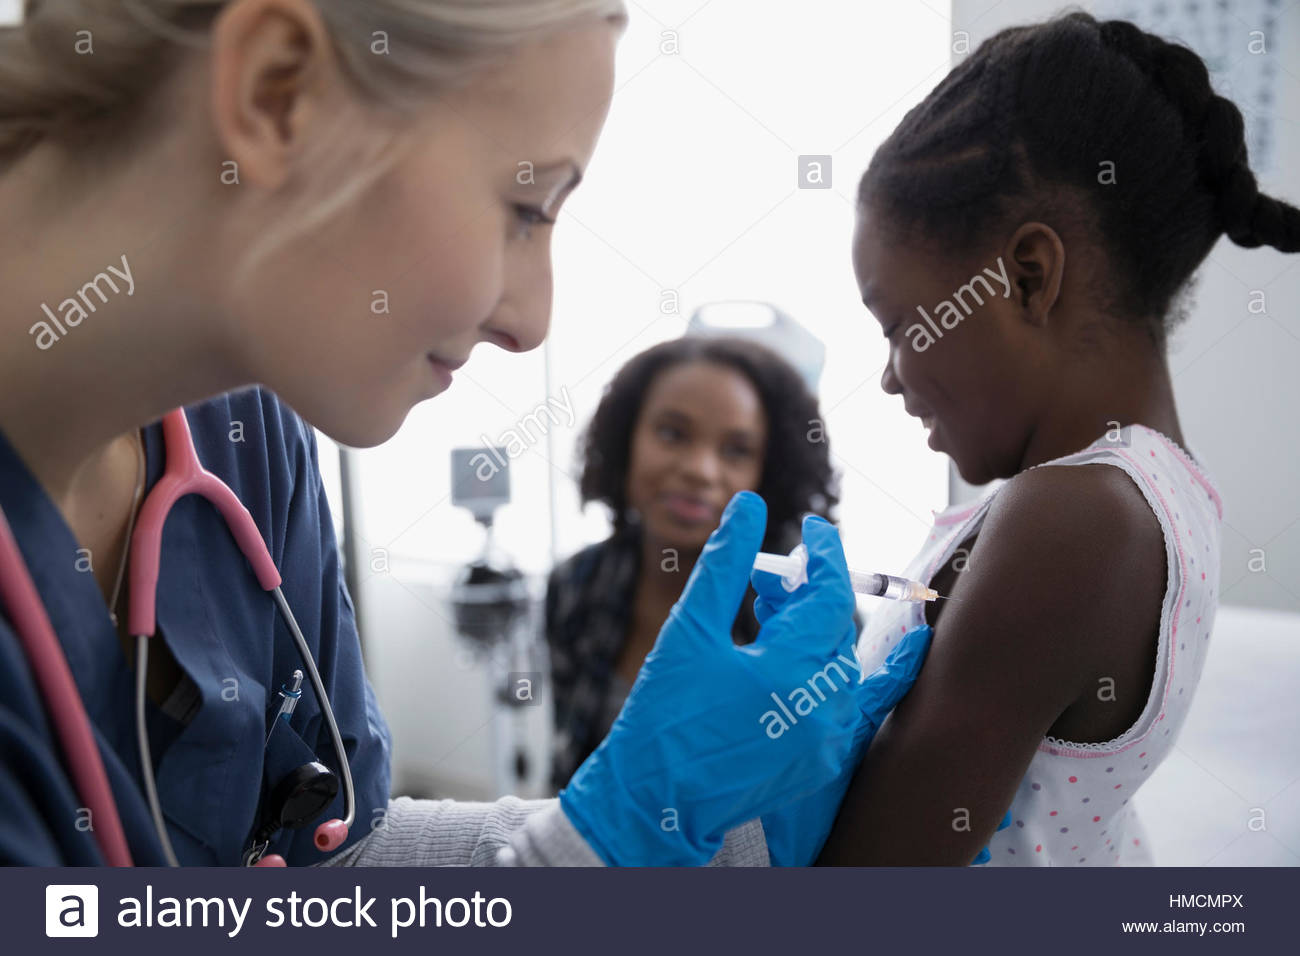 Female nurse giving frightened girl patient an injection in the arm in clinic examination room Stock Photo